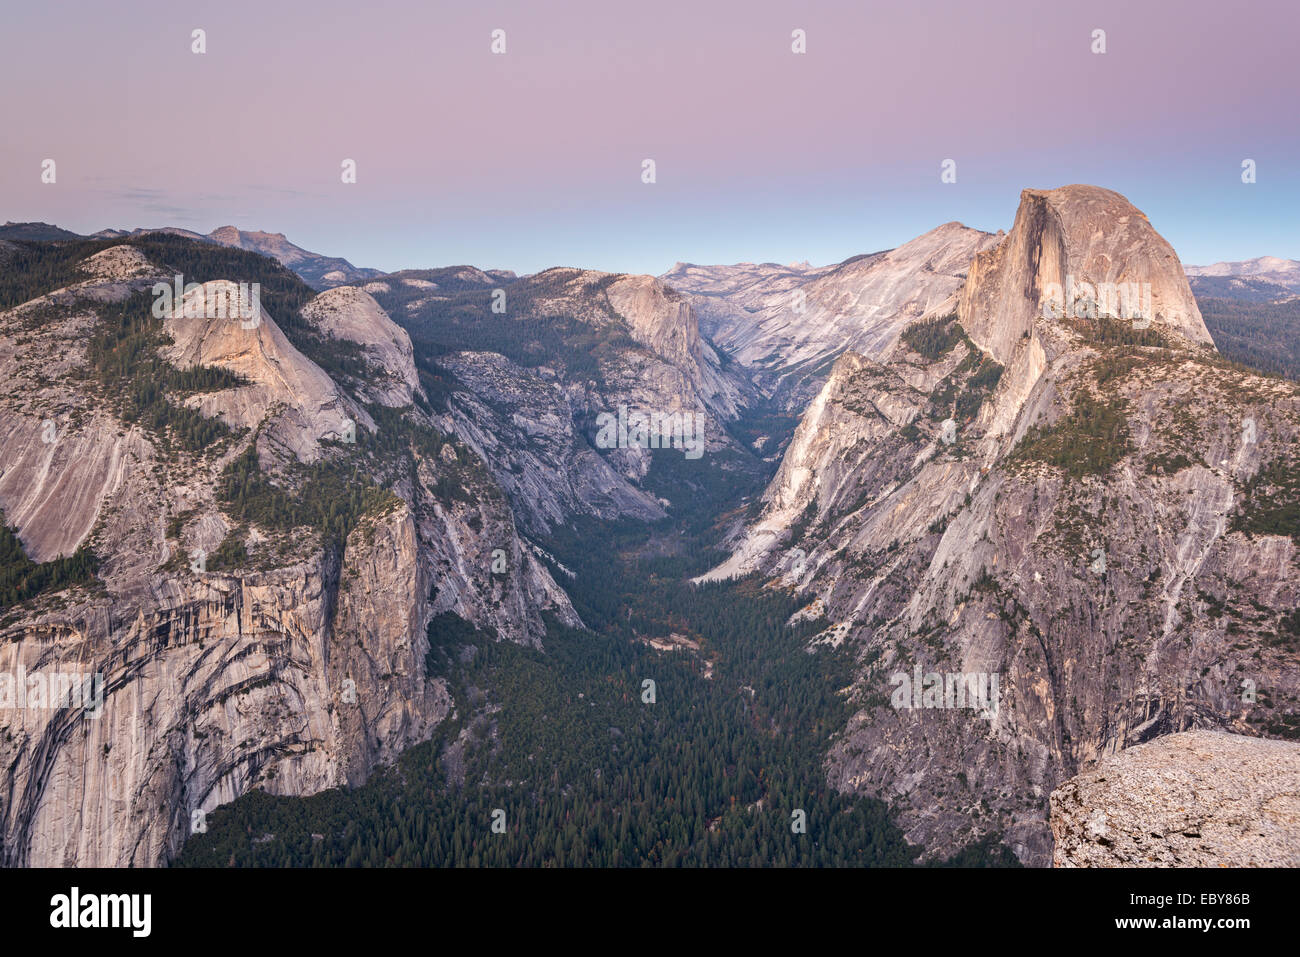 Half Dome and Yosemite Valley from Glacier Point, California, USA. Autumn (October) 2013. Stock Photo